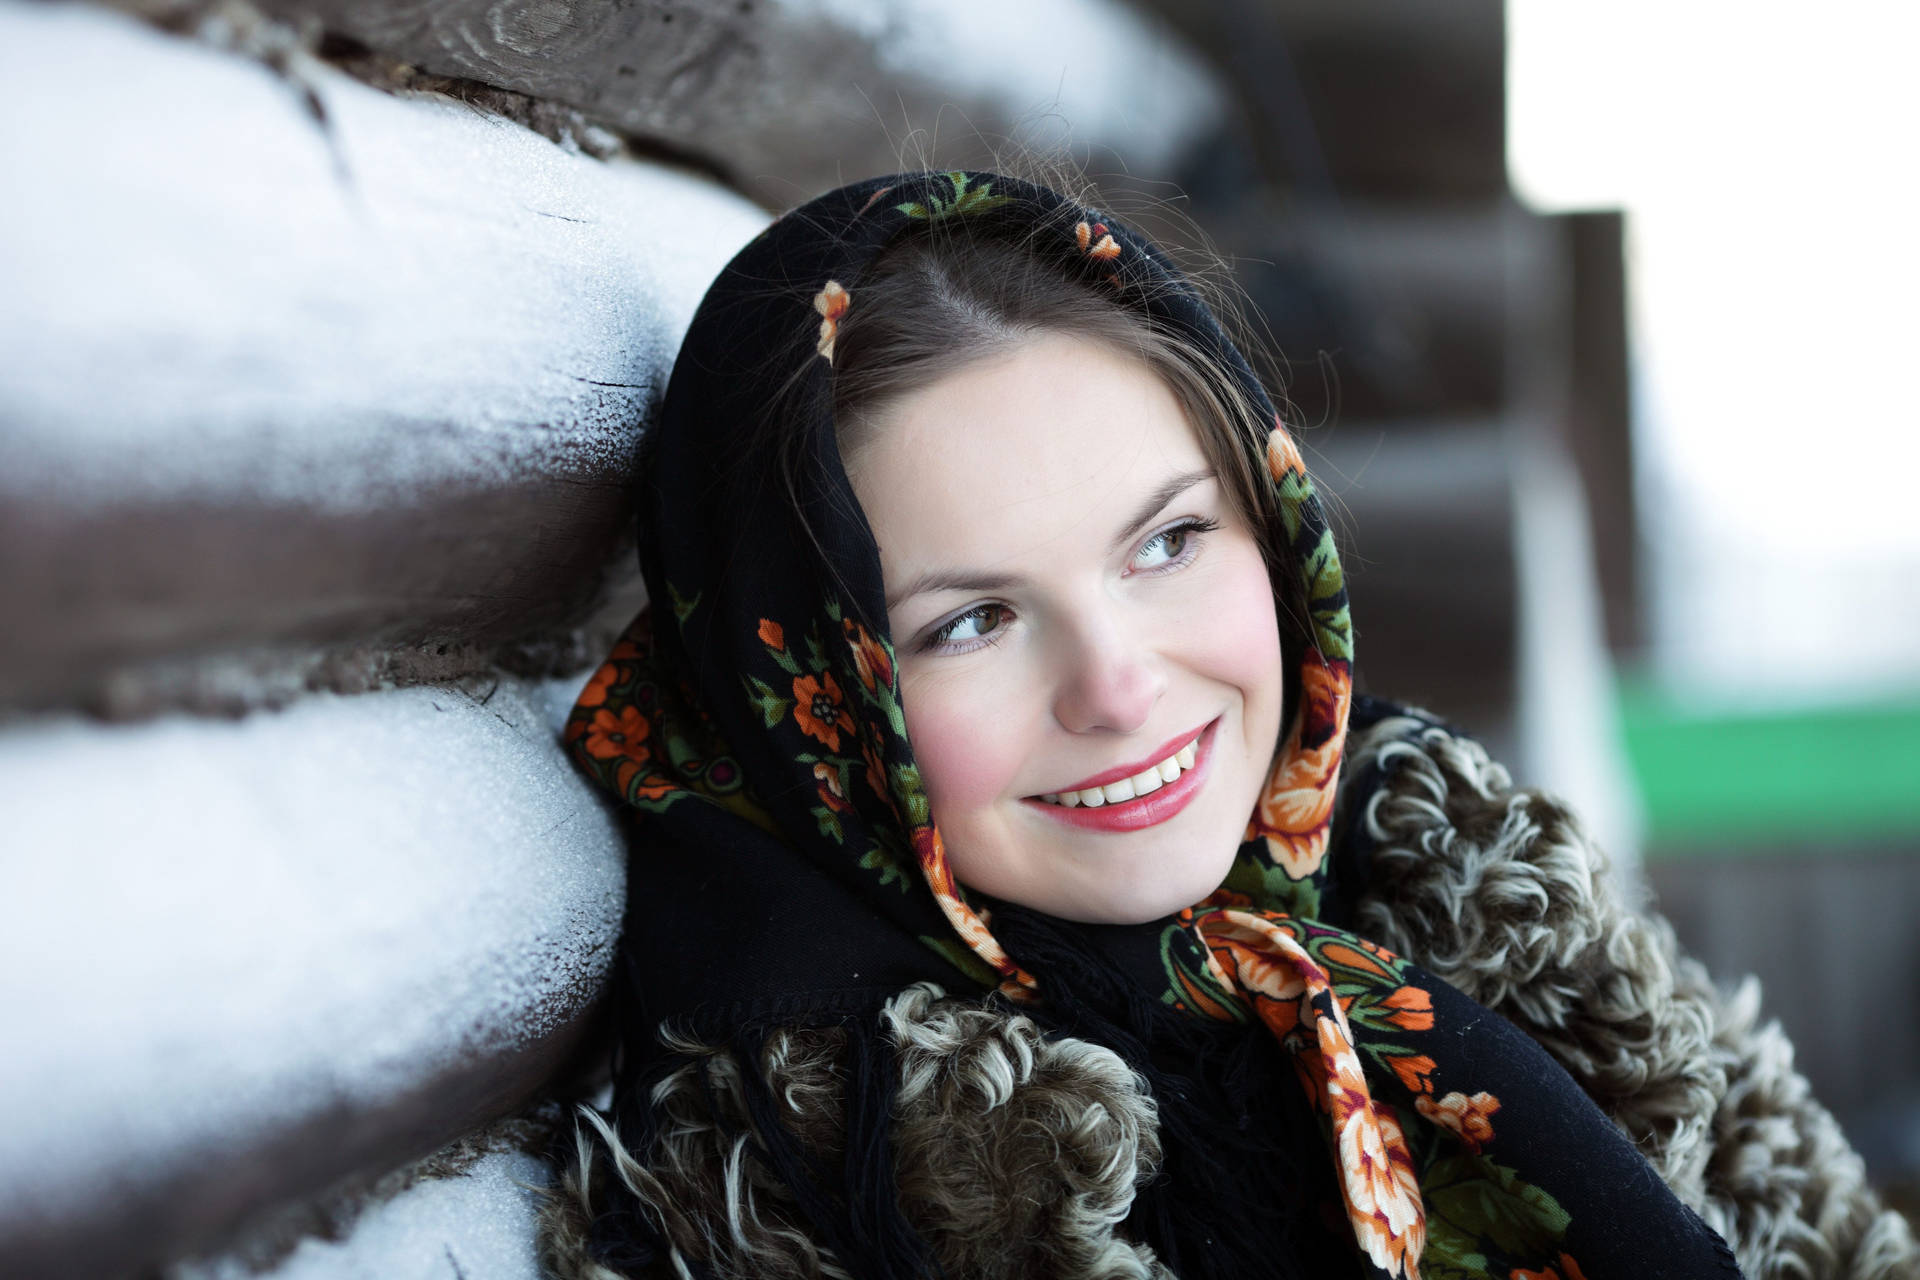 Premium Photo  Stylish beautiful young woman model with makeup in winter  clothes with a vintage scarf and fur coat on a snowy cold winter day.  russian women's winter style outerwear